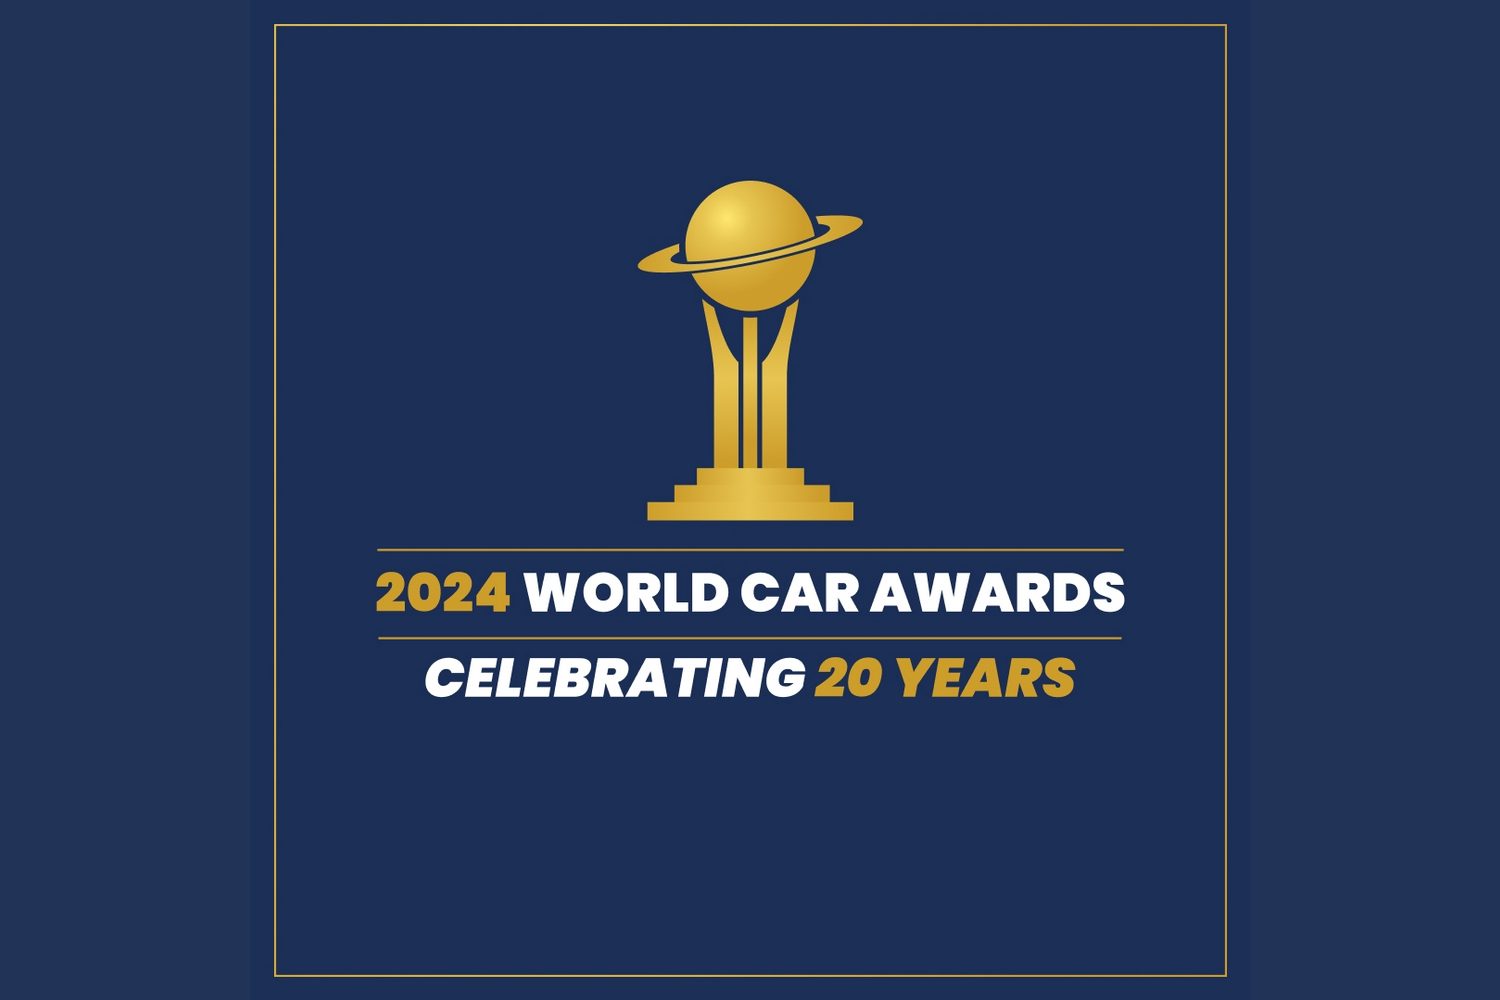 Contest to find World Car of the Year 2024 started car and motoring